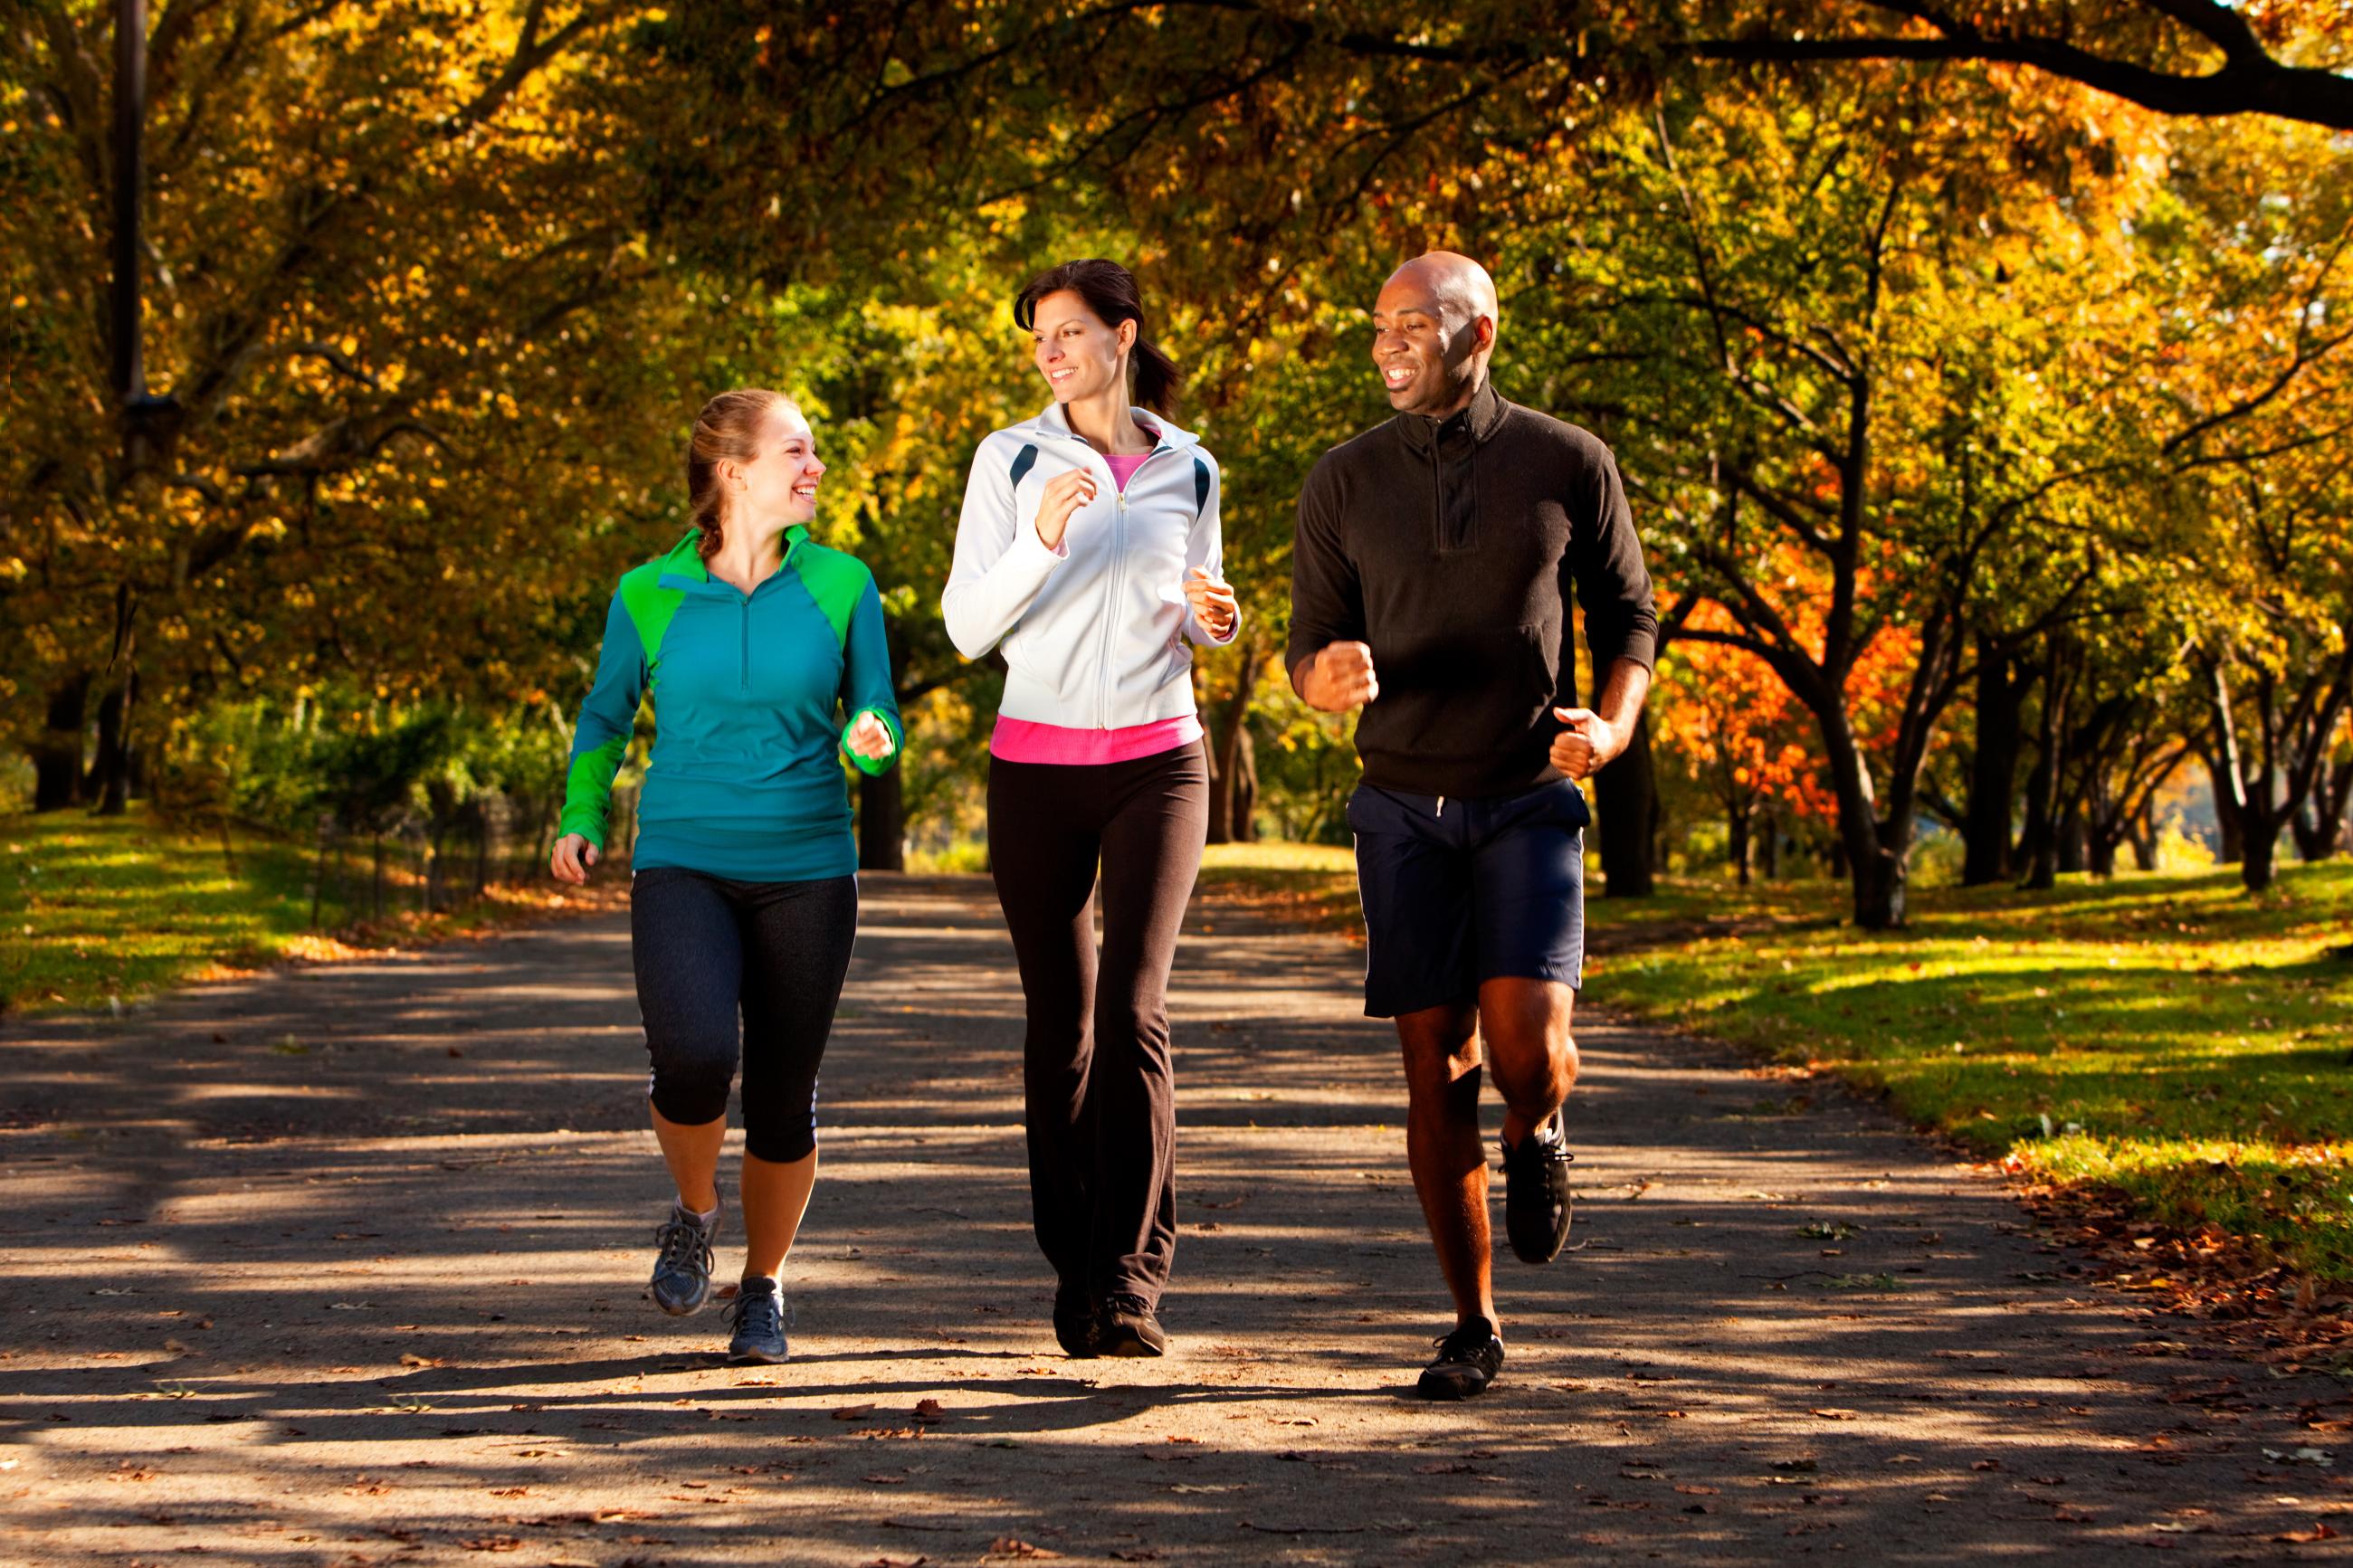 3 people jogging in a park.